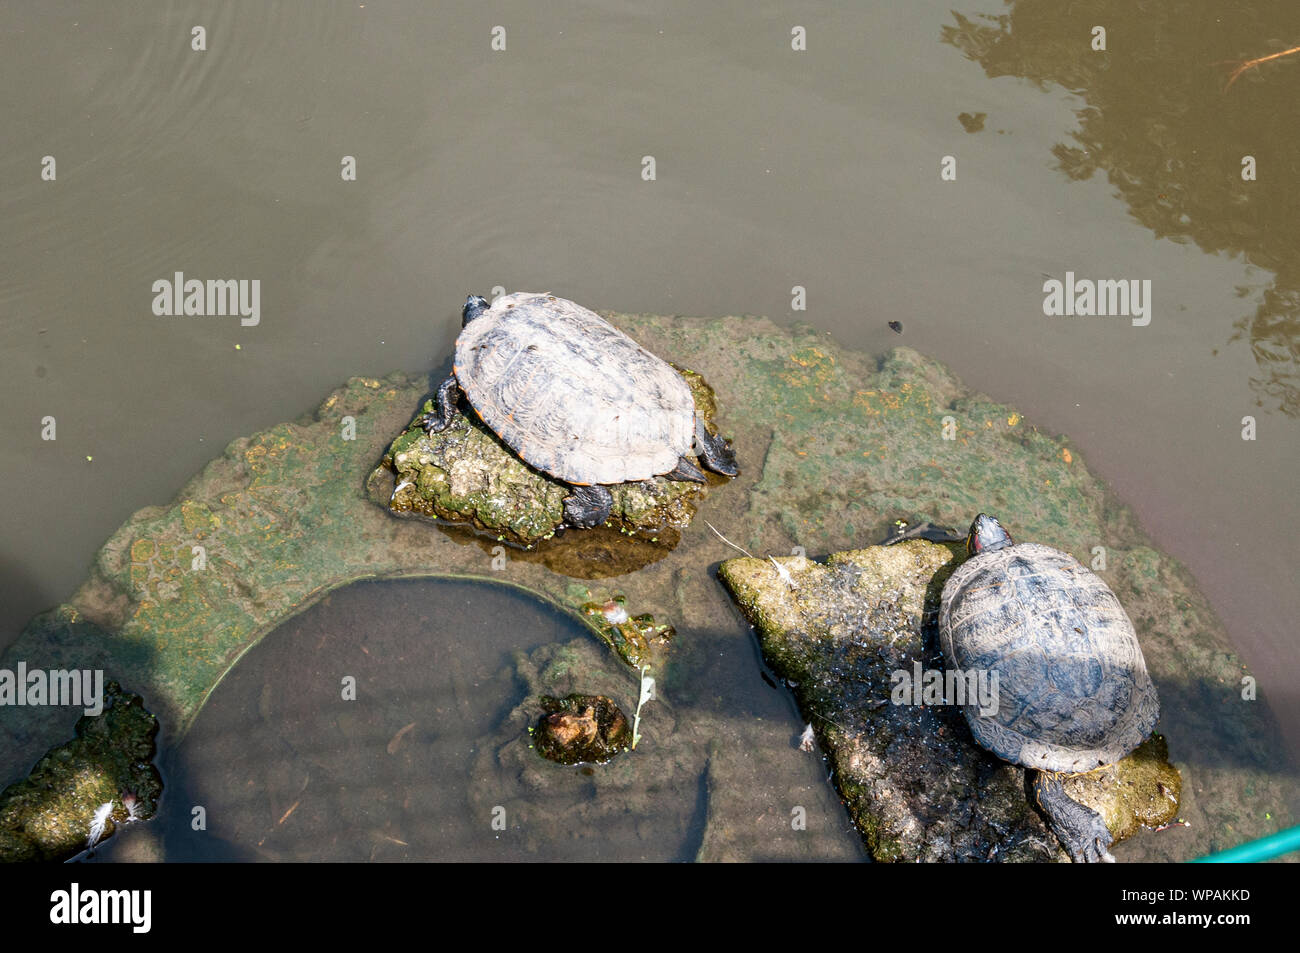 Two red-eared terrapins stretch out to expose their heads, legs, feet and tails showing their red and yellow markings as they sunbathe on a rock Stock Photo